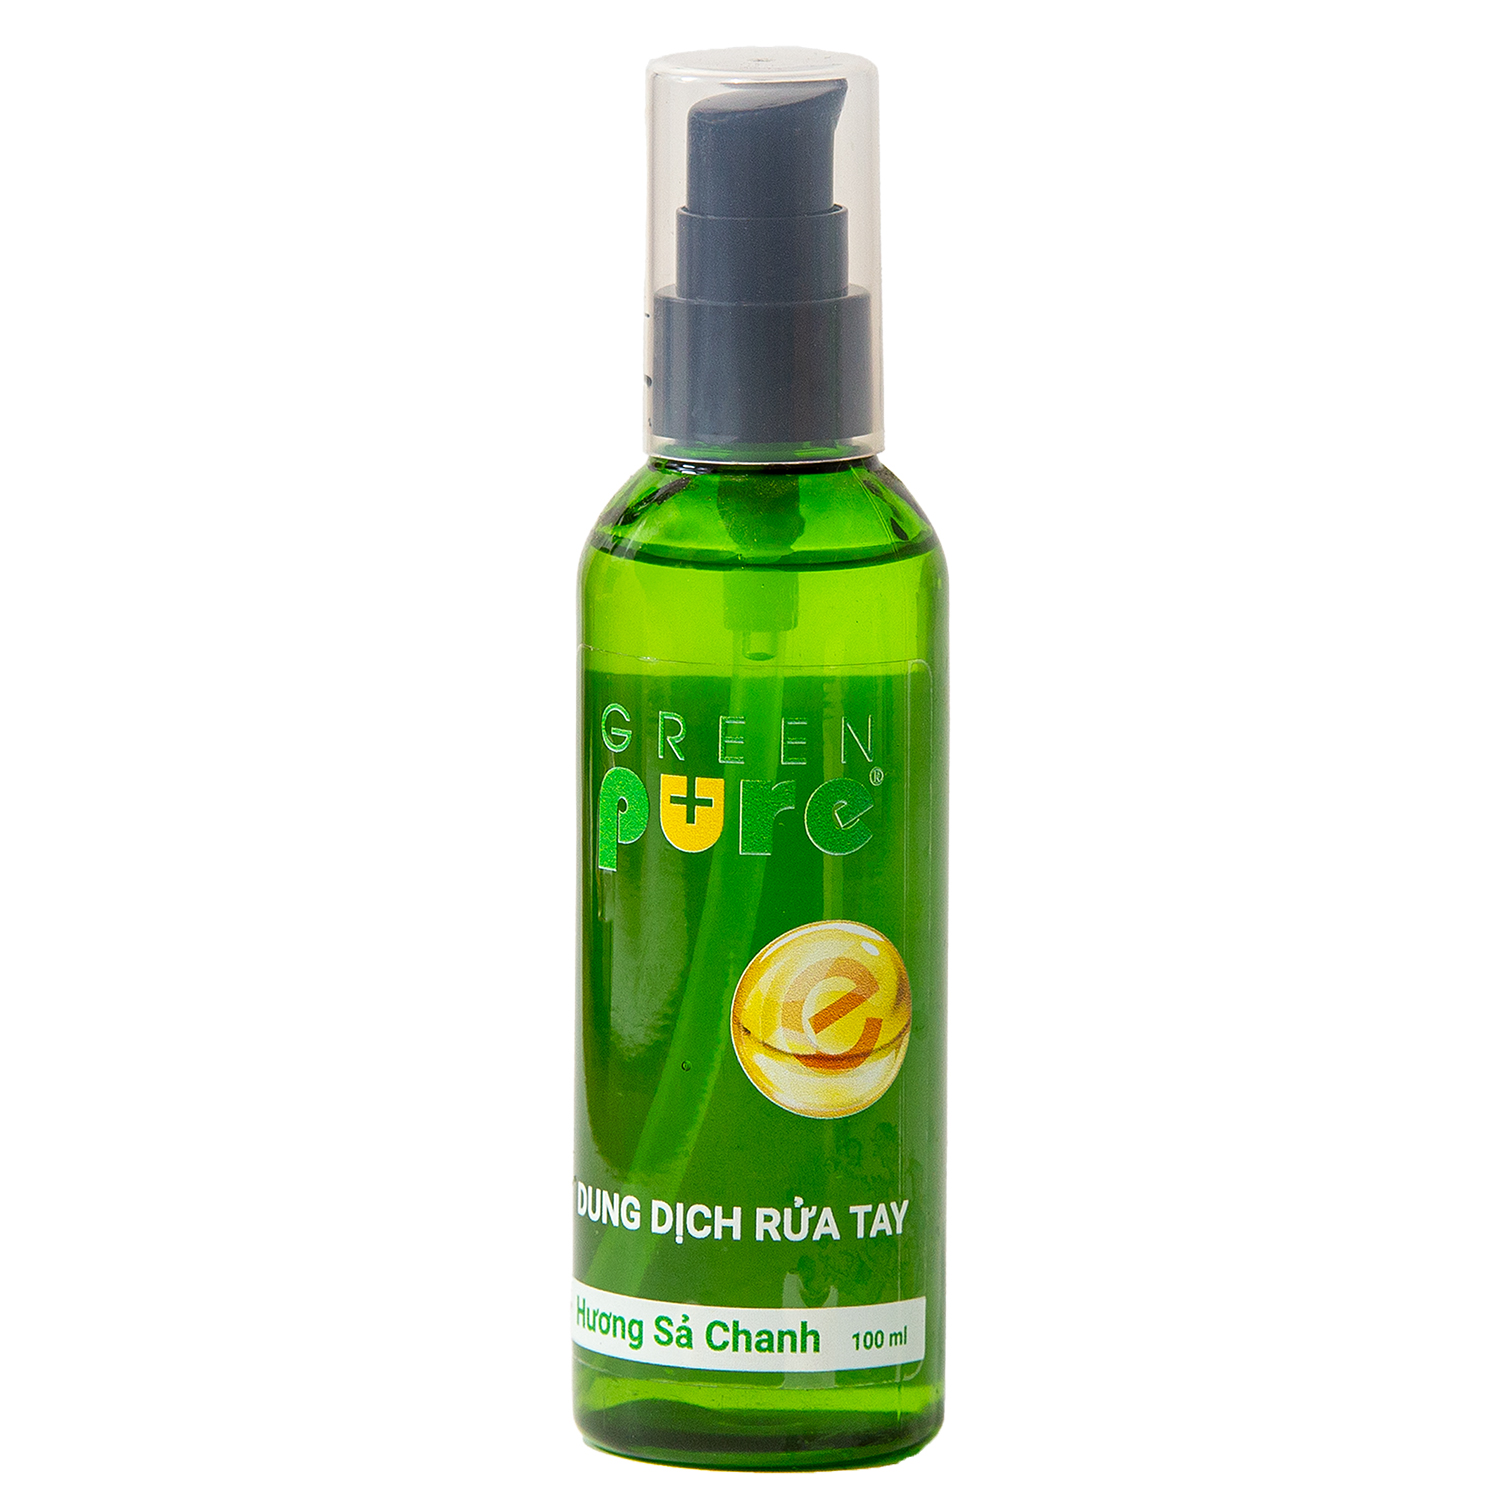 Dung dịch rửa tay Pure 100ml